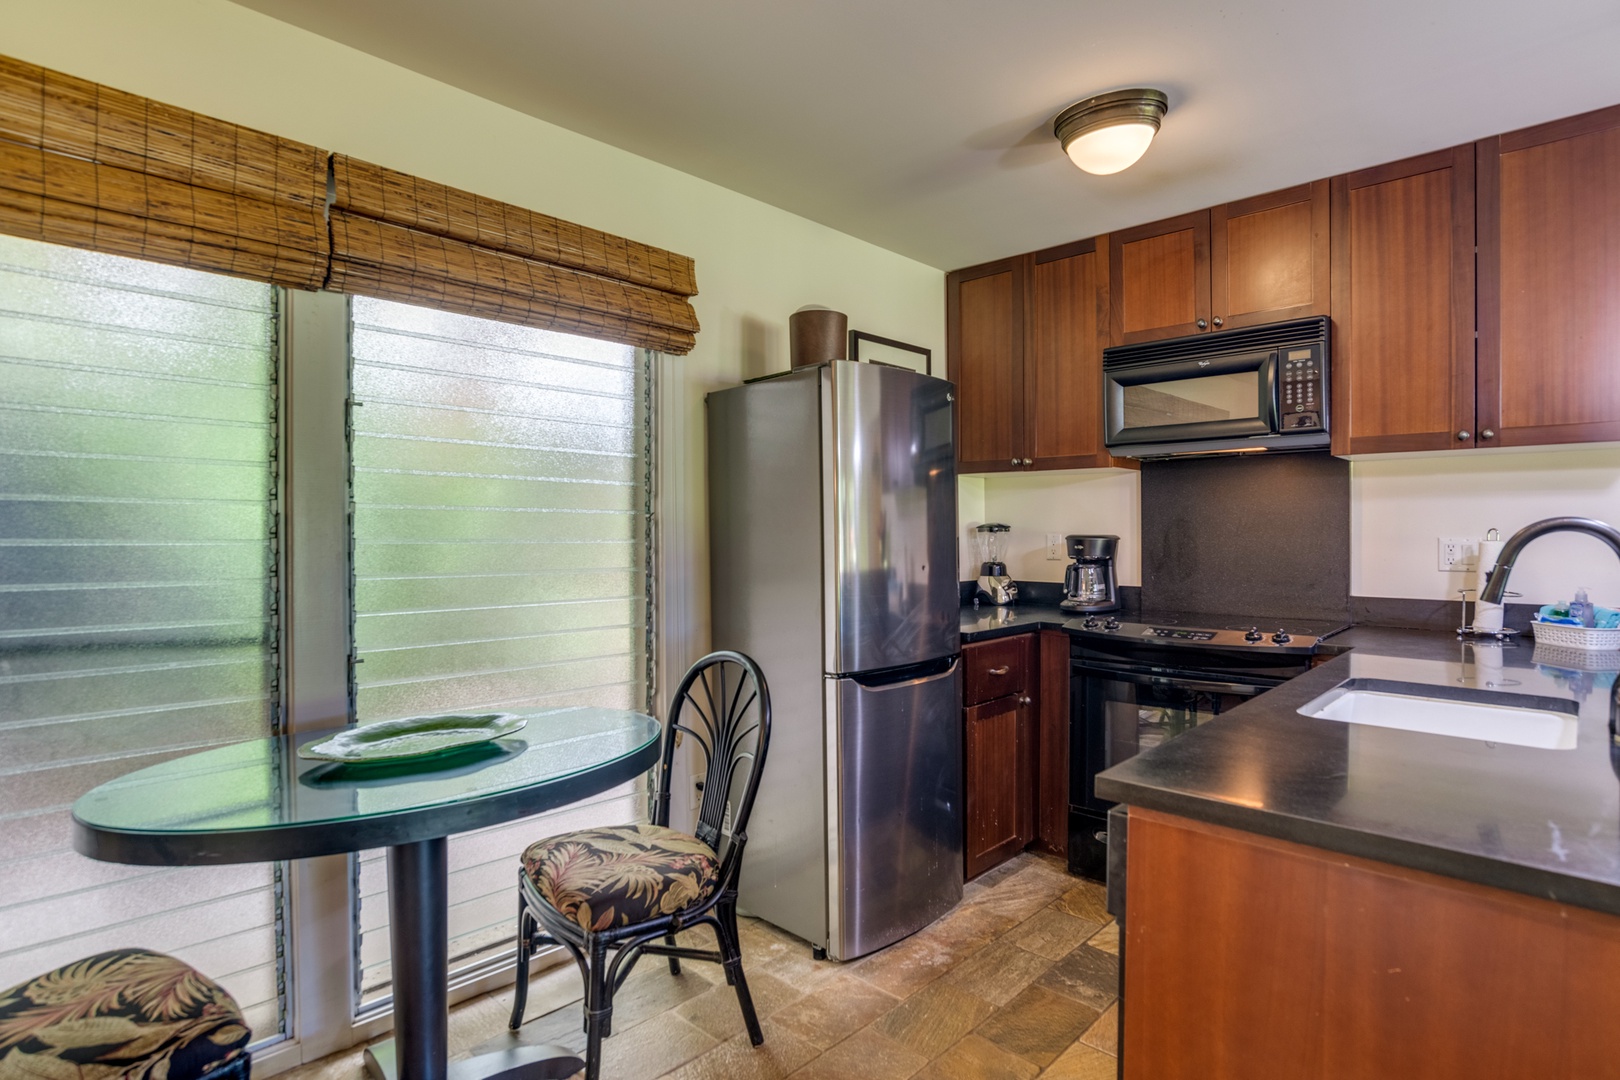 Lahaina Vacation Rentals, Aina Nalu D103 - The fully equipped kitchen has everything you need to whip up a quick breakfast or a dinner feast